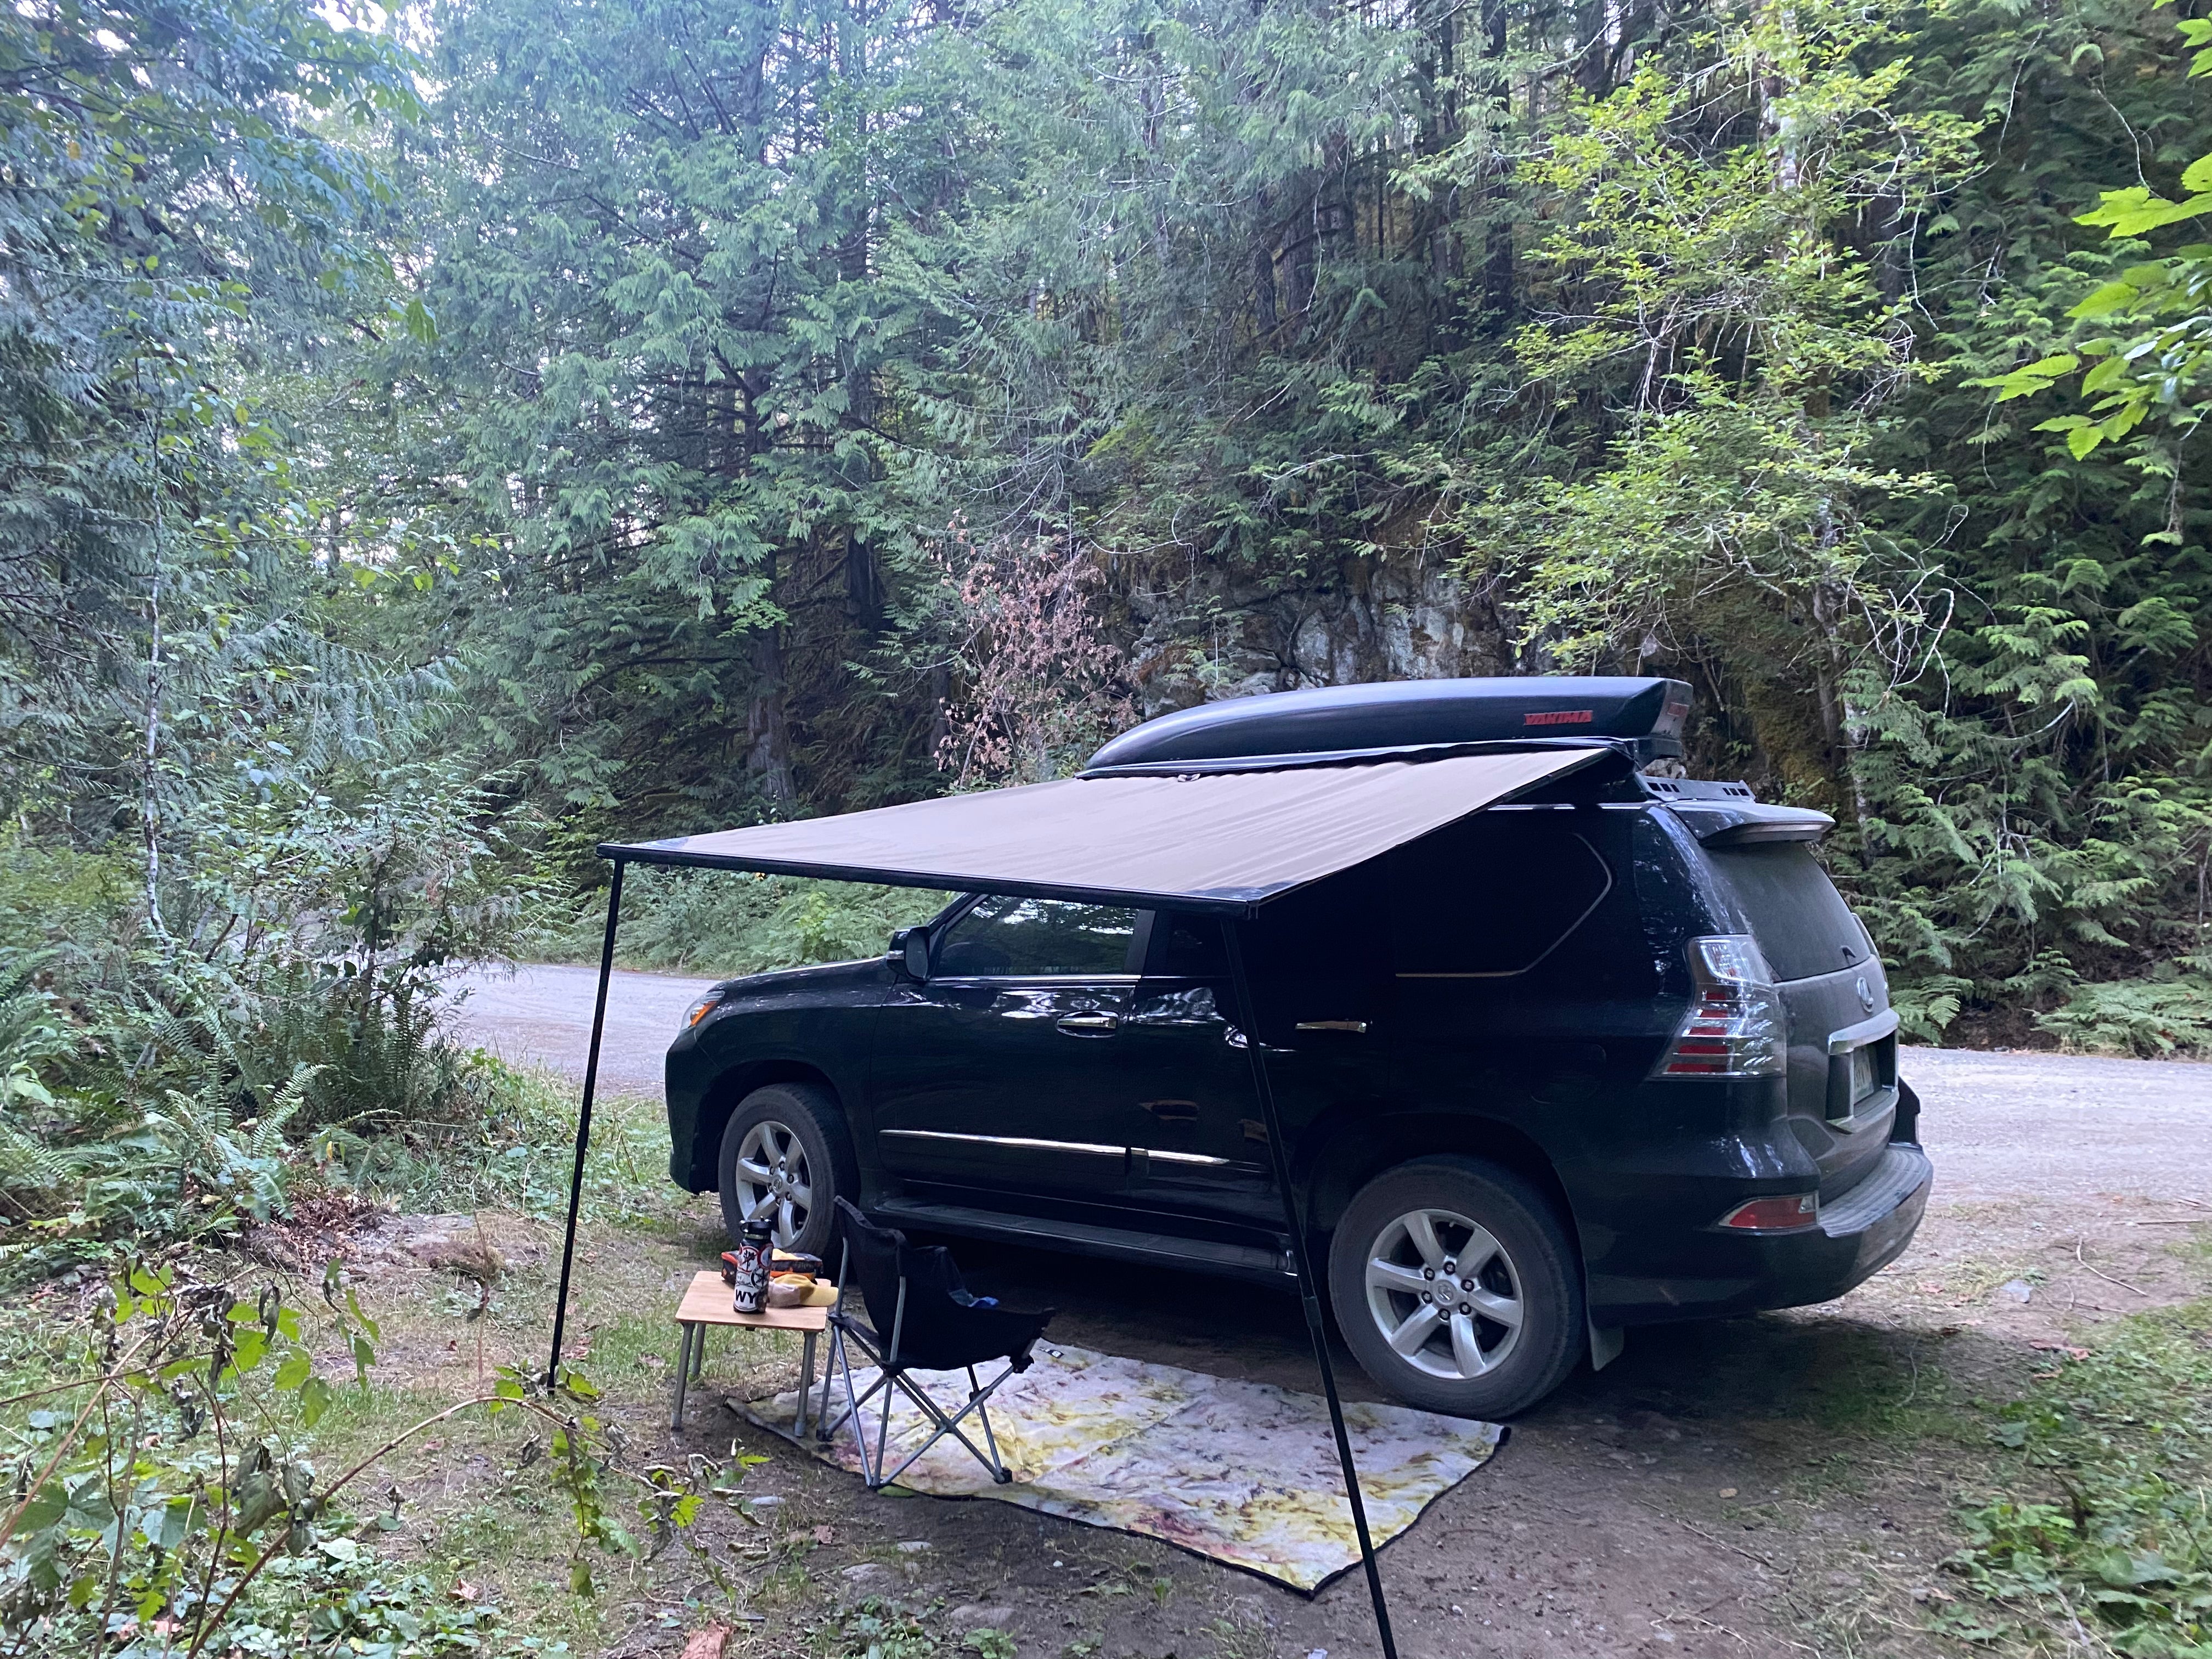 Camper submitted image from NF Dispersed Camping - 1